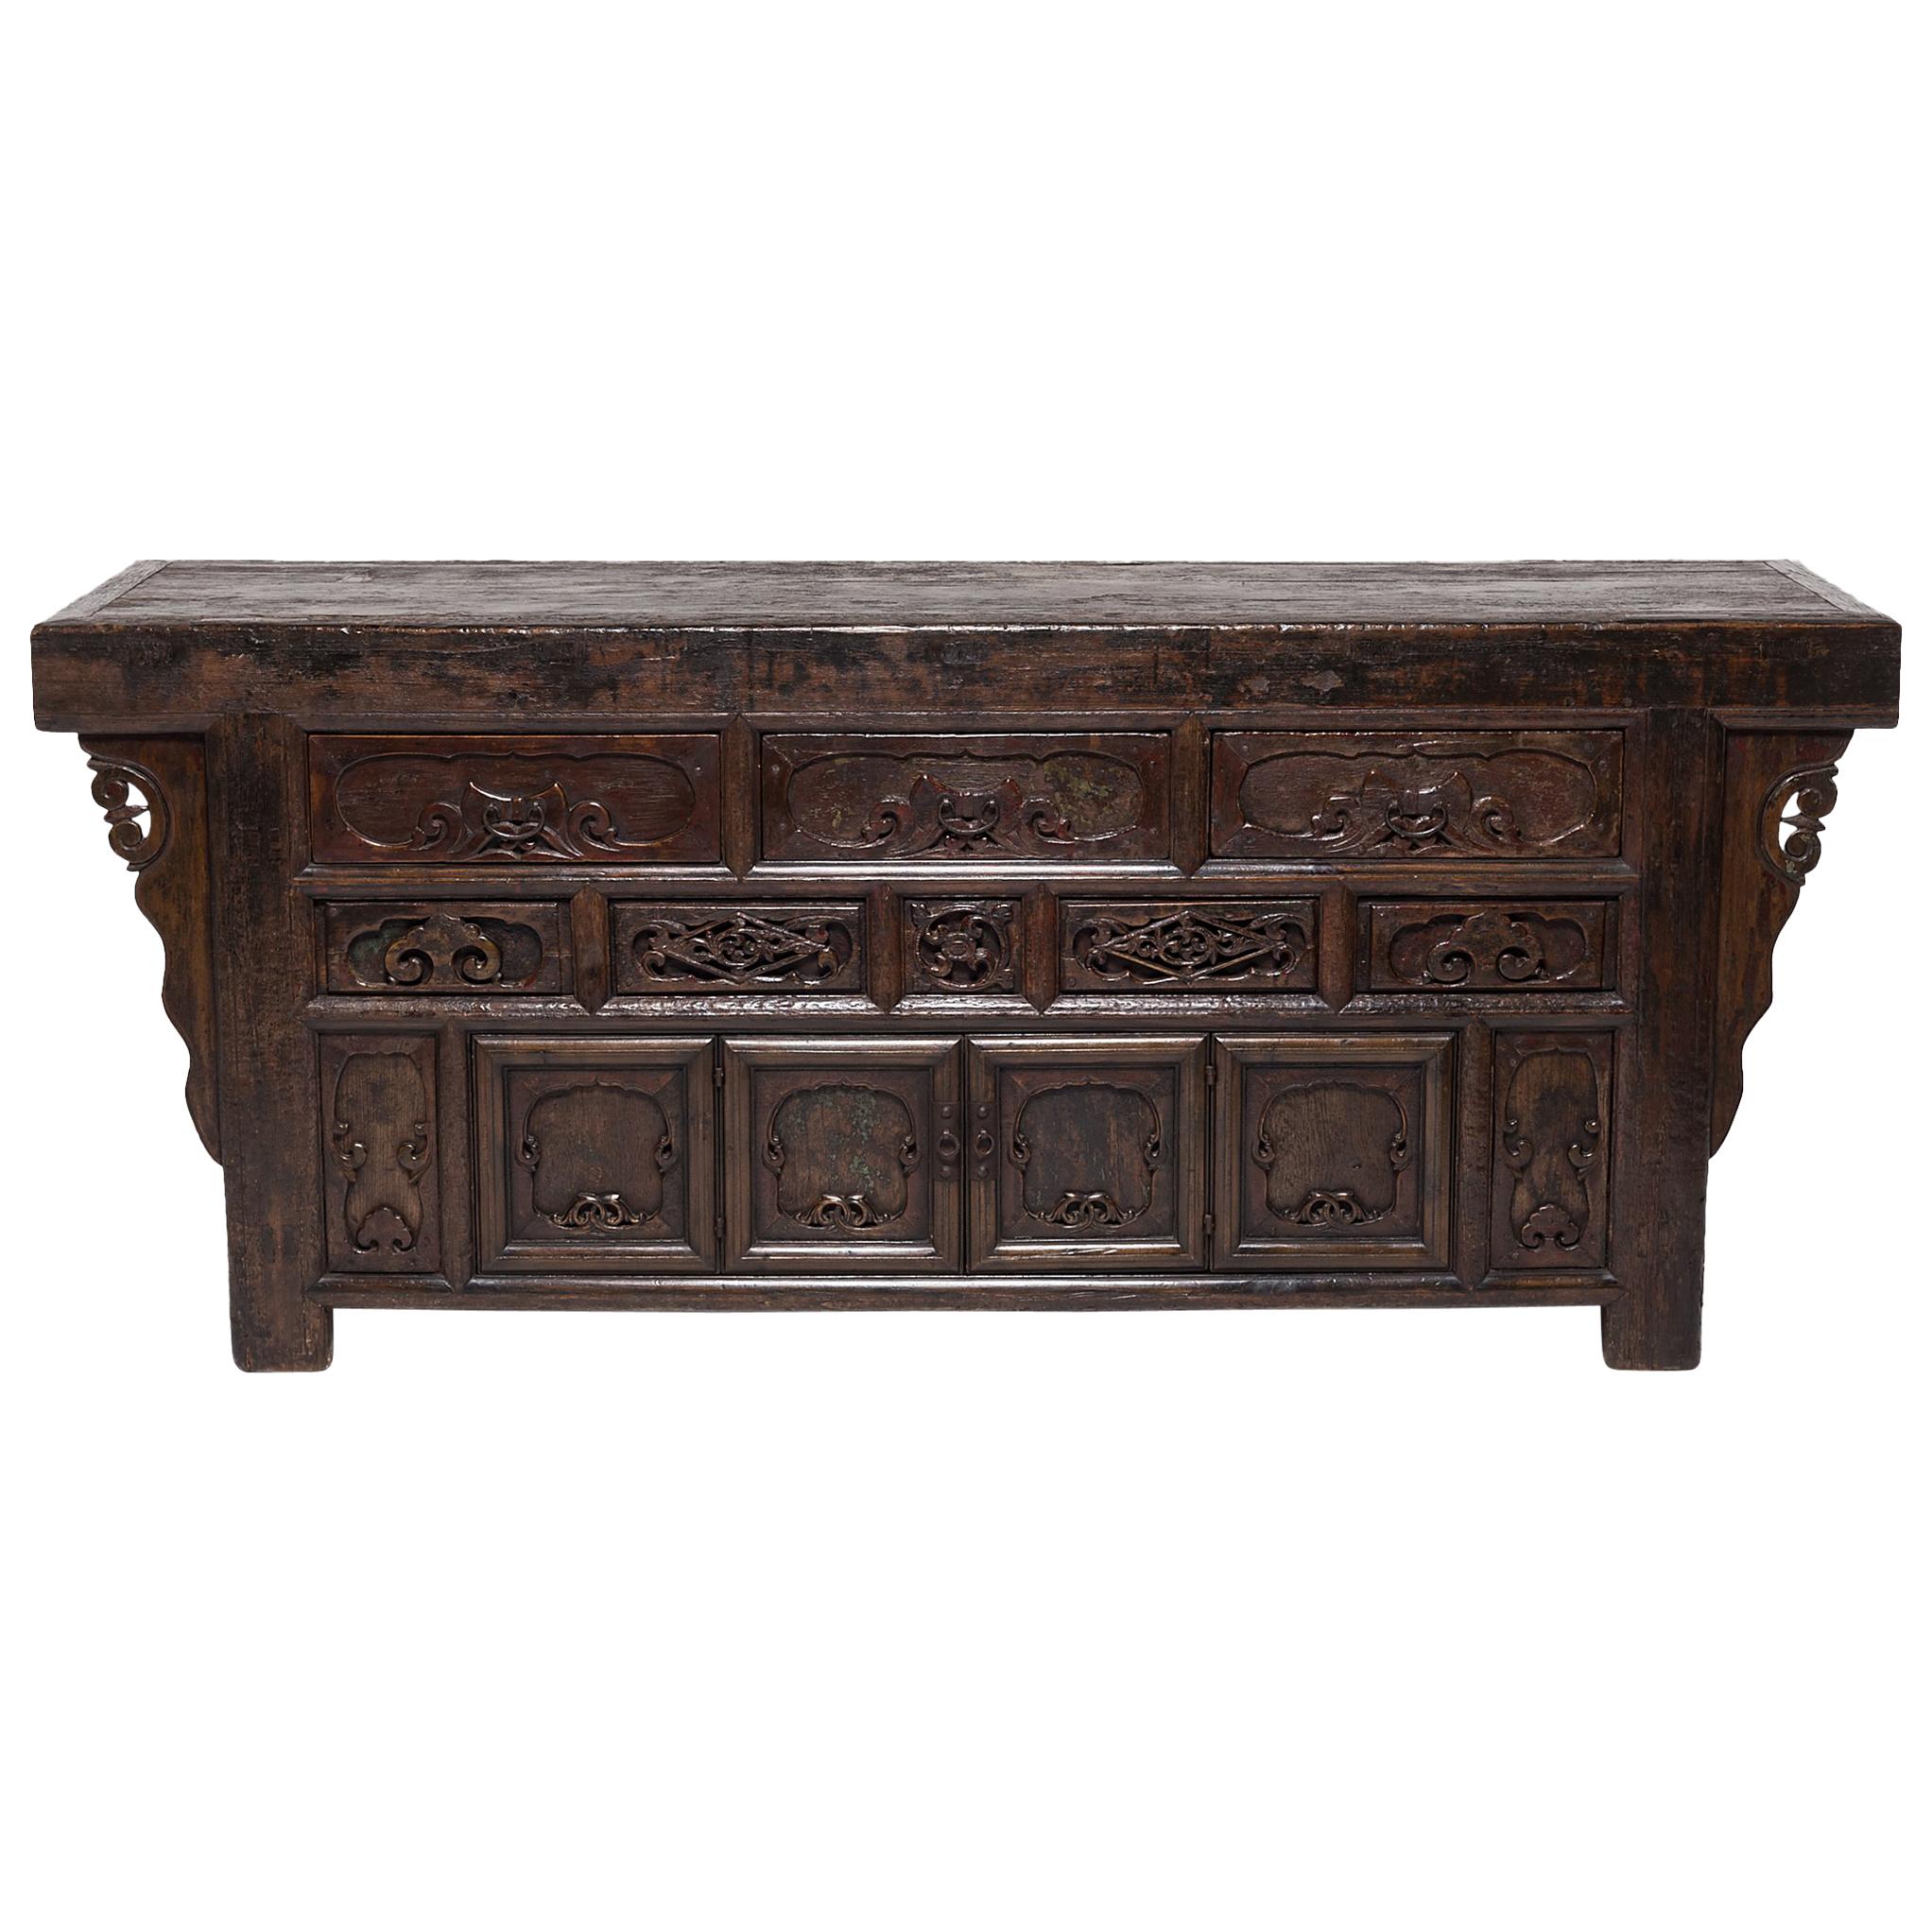 19th Century Provincial Chinese Sideboard